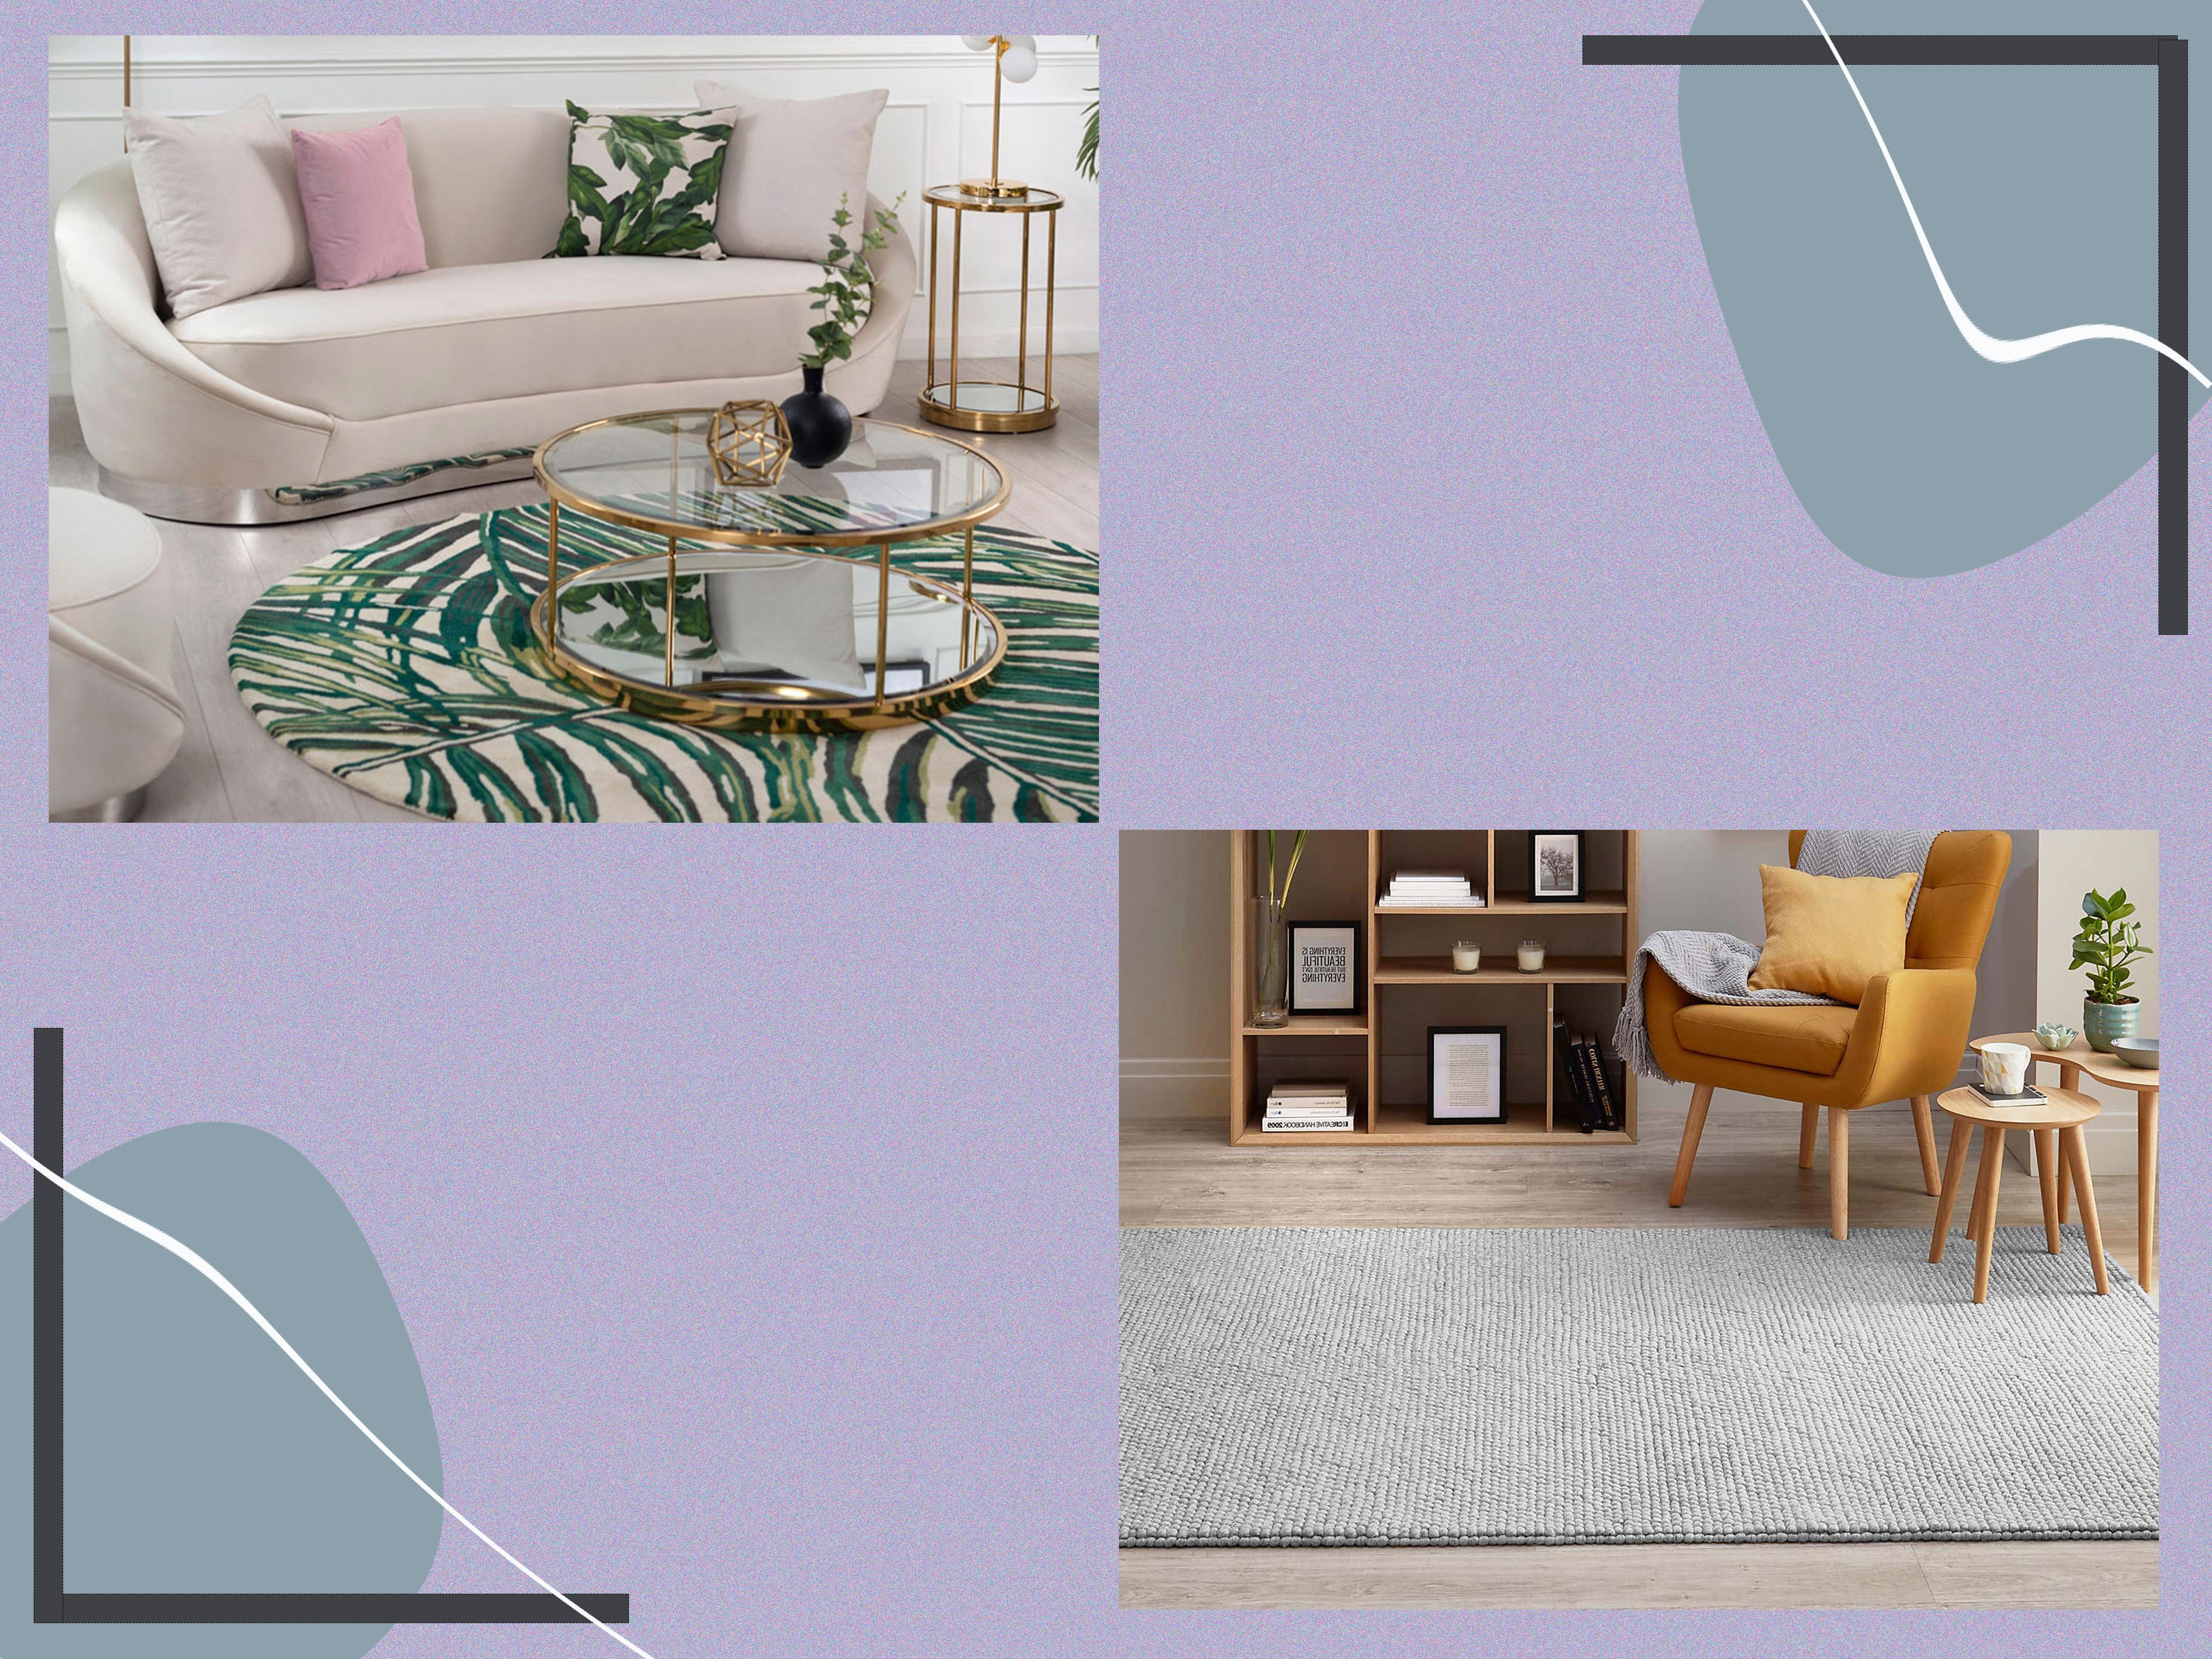 Whether you’re looking to layer up a bedroom or bring warmth to a stone floor, a statement carpet is the way to go